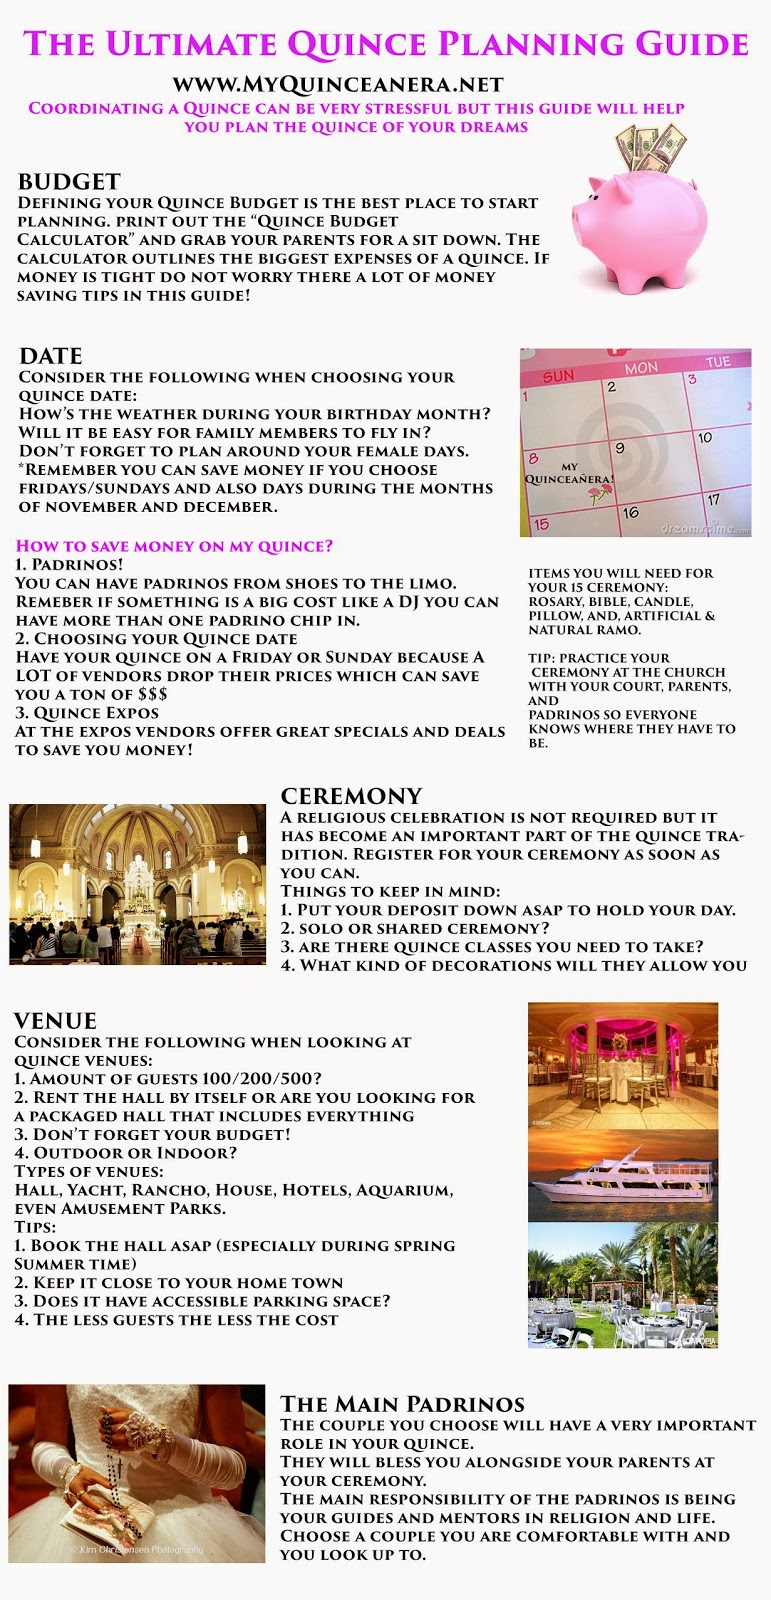 My Quinceañera: Planning Guide - Free Quinceanera Planner Printable